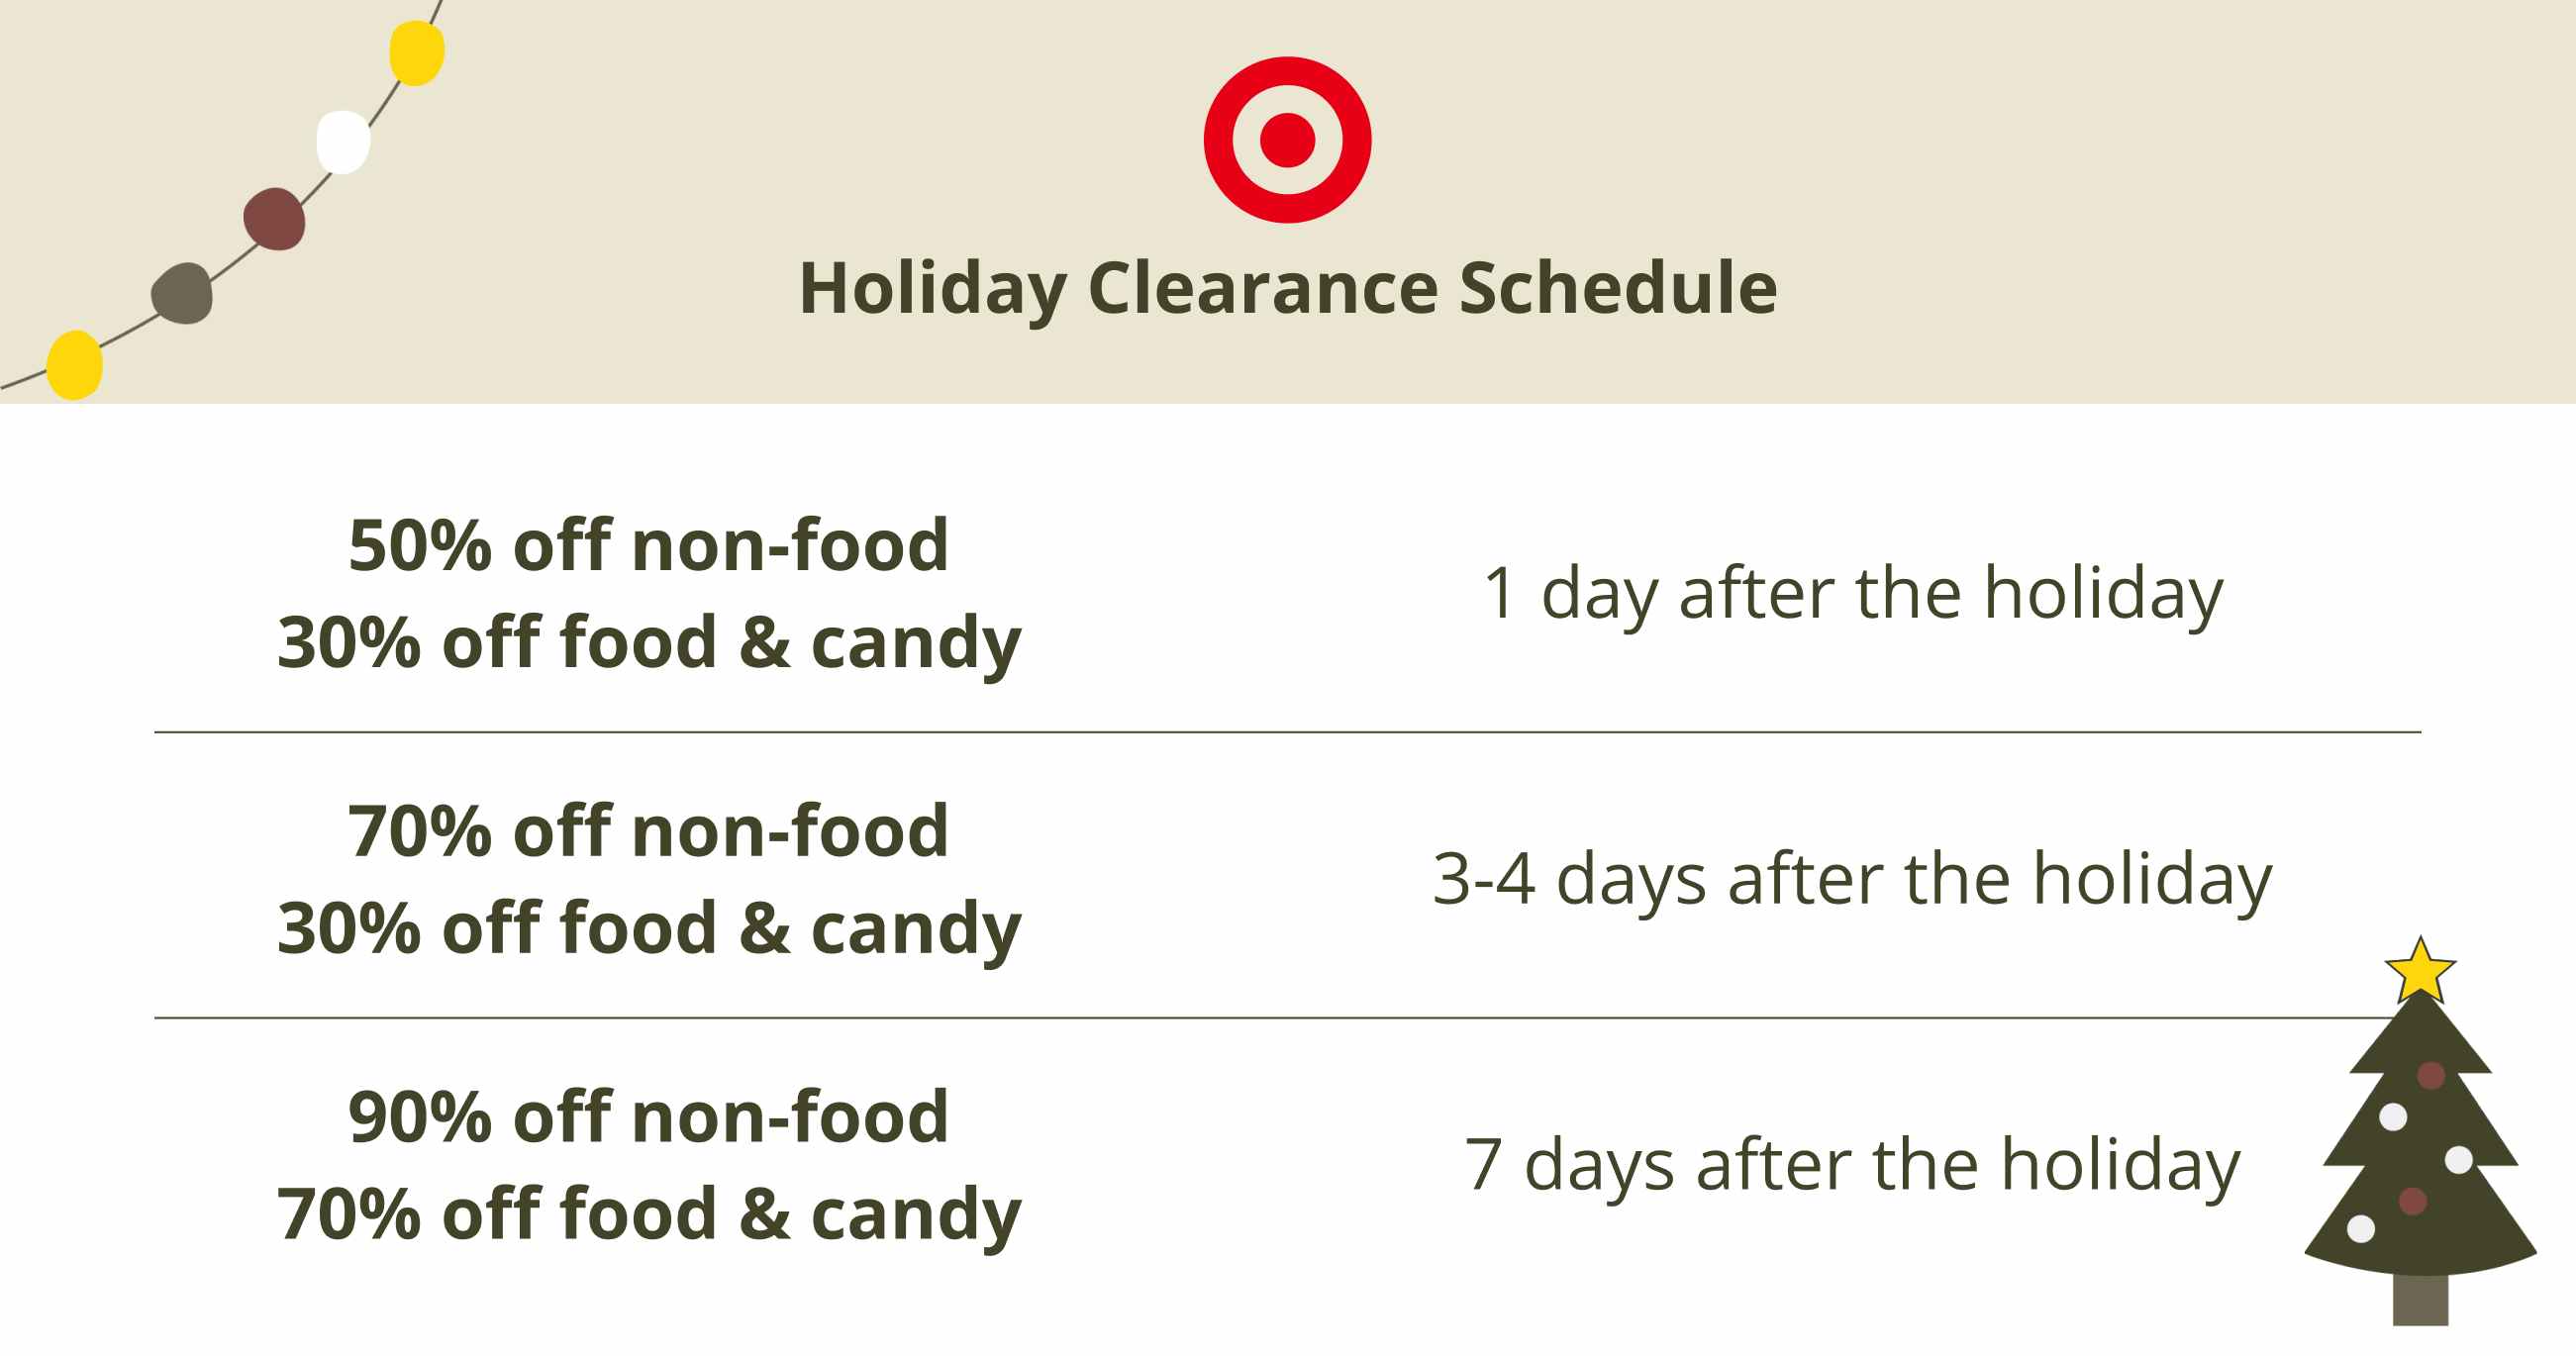 Target holiday clearance markdown schedule showing when seasonal clearance discounts happen. 1 day after the holiday: 30% off food, 50% o...